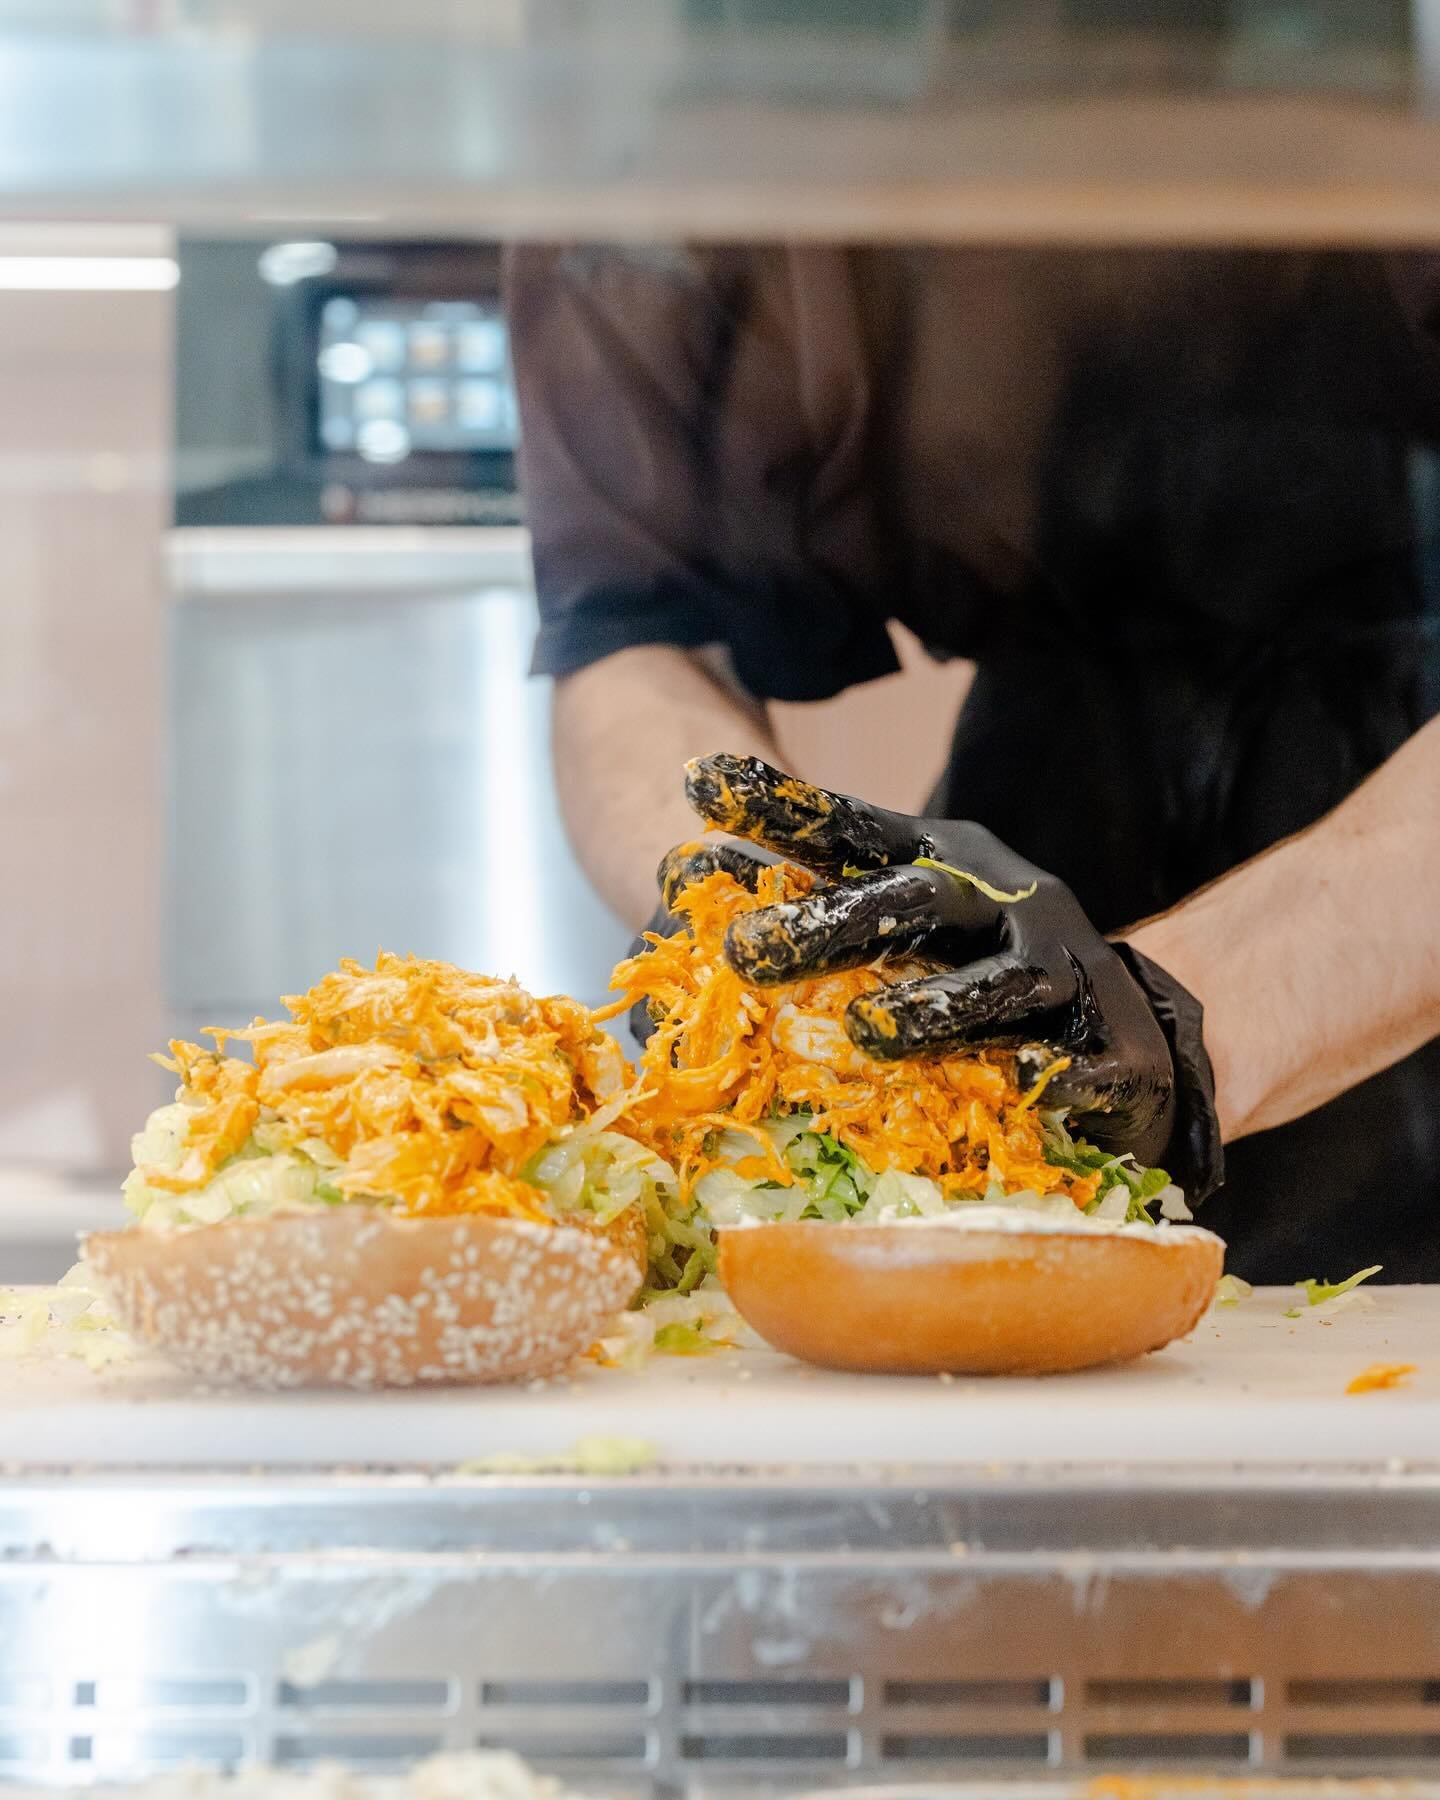 Loading them up one bagel at a time. Have you tried our Buffalo bagel? This one&rsquo;s on fire. 

#Neighbourhoodbagel #neighbourhoodbagel #bagel #bagels #perthbagels #bagelshop #bagelstore #nycbagels #newyork #newyorkbagels #bagelshopgoals #instafoo